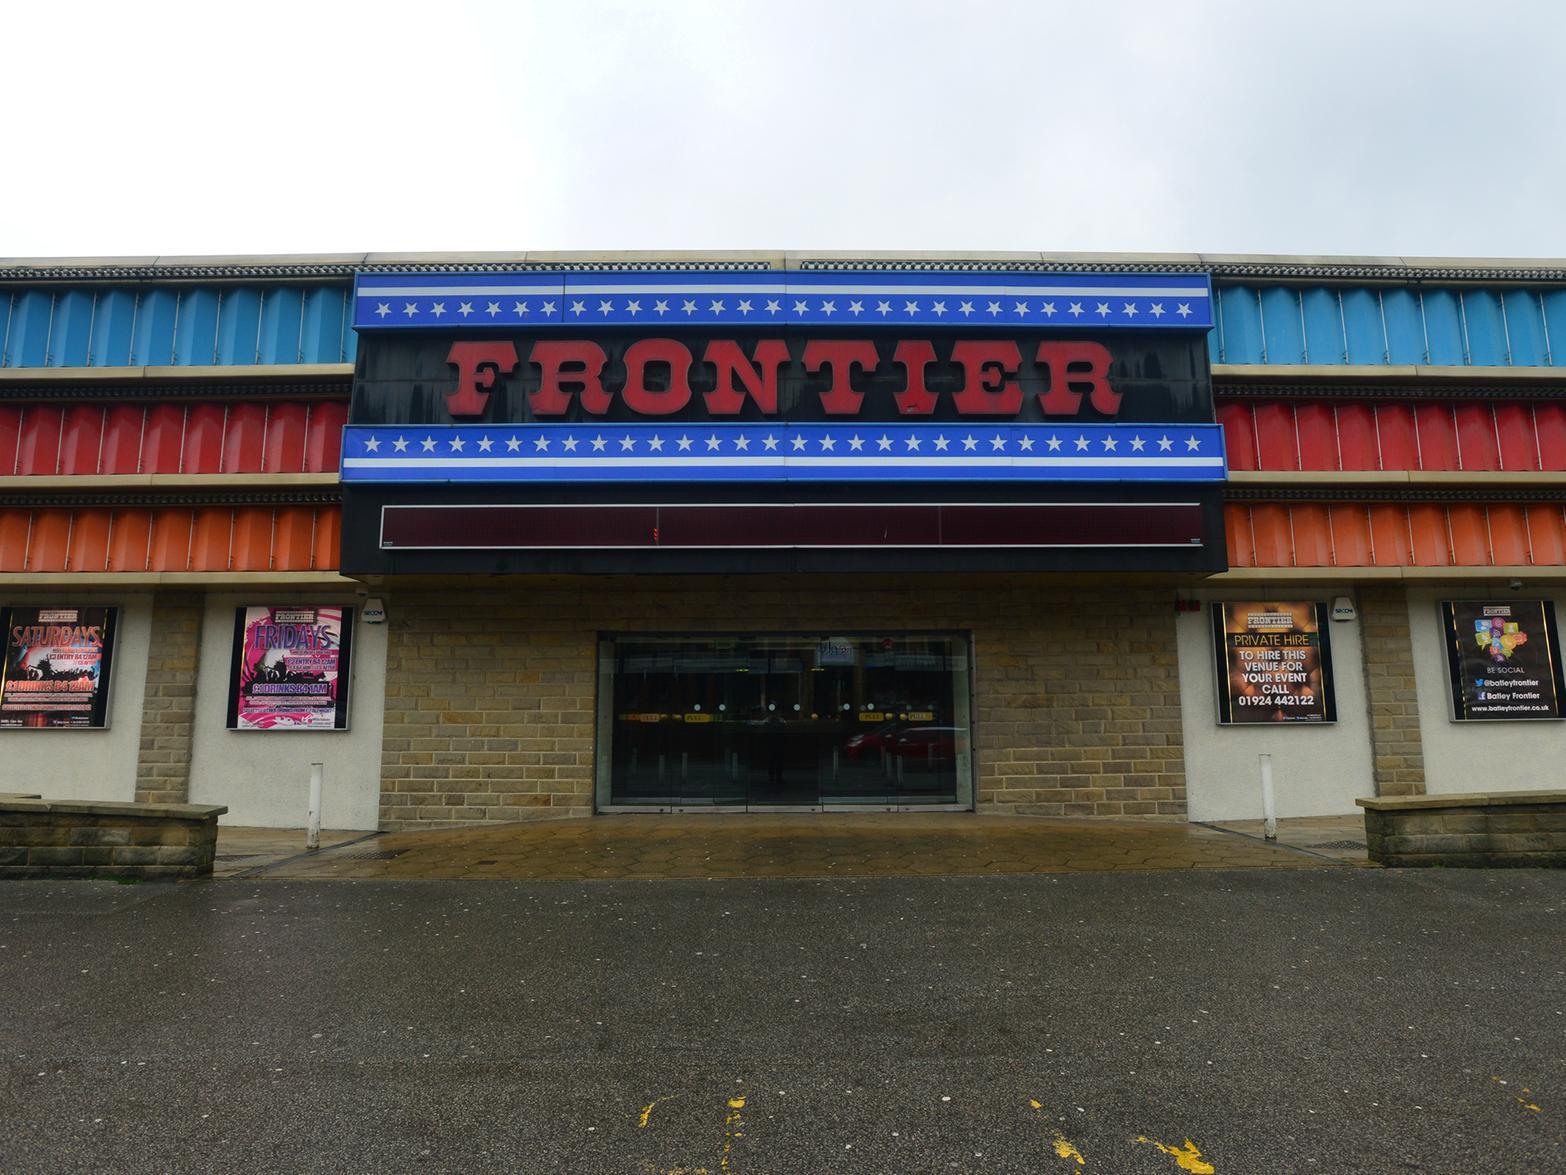 Share your memories of nights out at The Frontier with Andrew Hutchinson via email at: andrew.hutchinson@jpress.co.uk  or tweet him @AndyHutchYPN